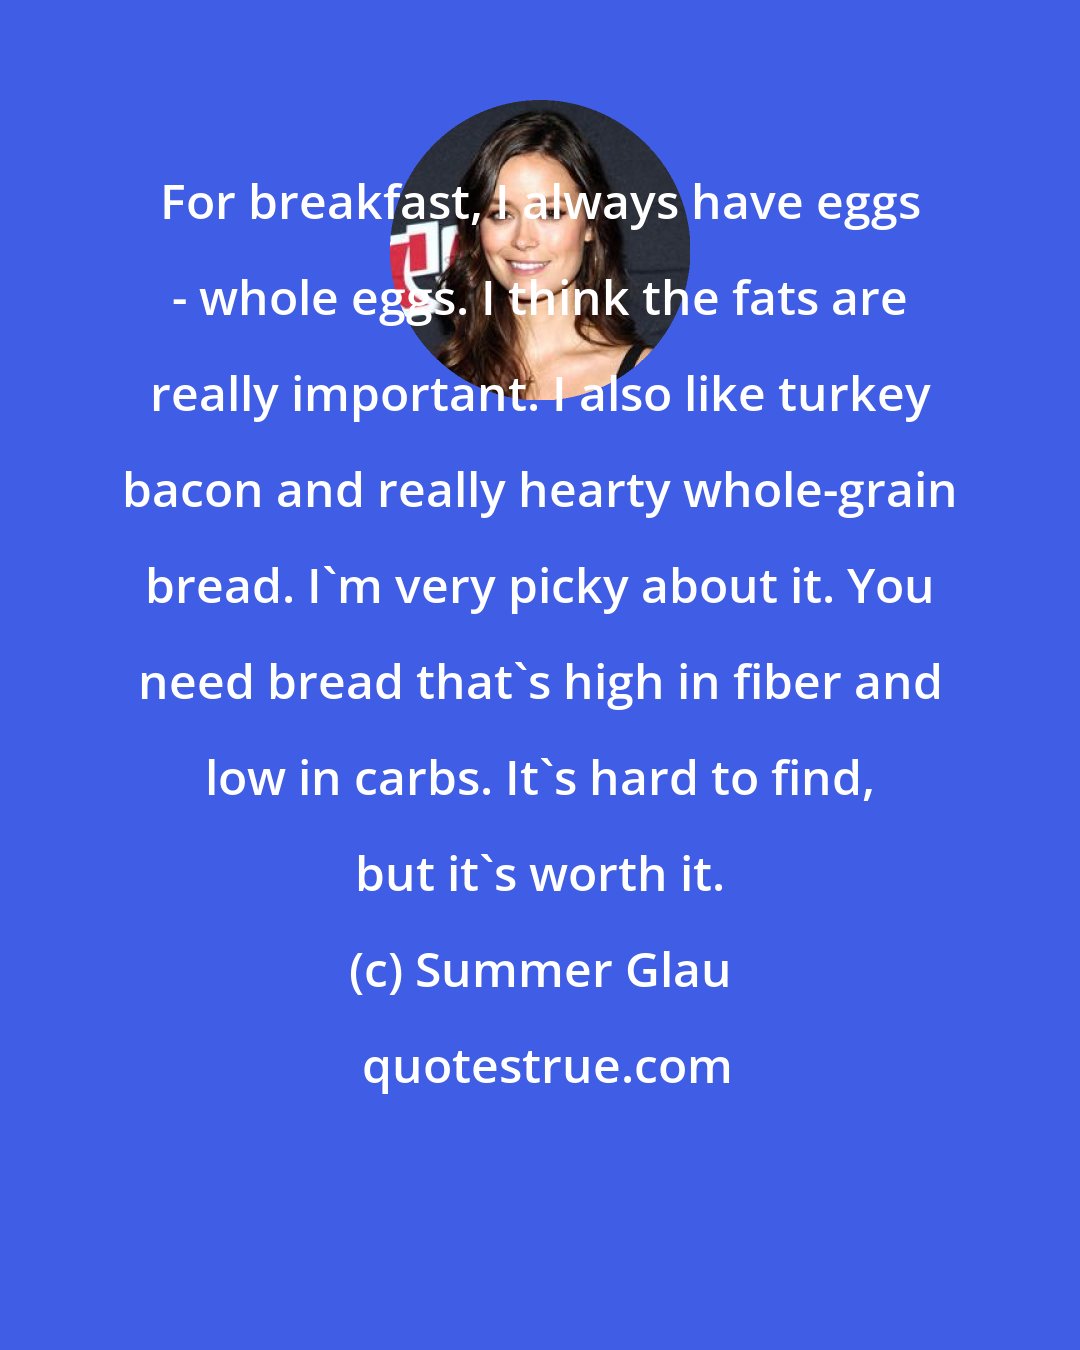 Summer Glau: For breakfast, I always have eggs - whole eggs. I think the fats are really important. I also like turkey bacon and really hearty whole-grain bread. I'm very picky about it. You need bread that's high in fiber and low in carbs. It's hard to find, but it's worth it.